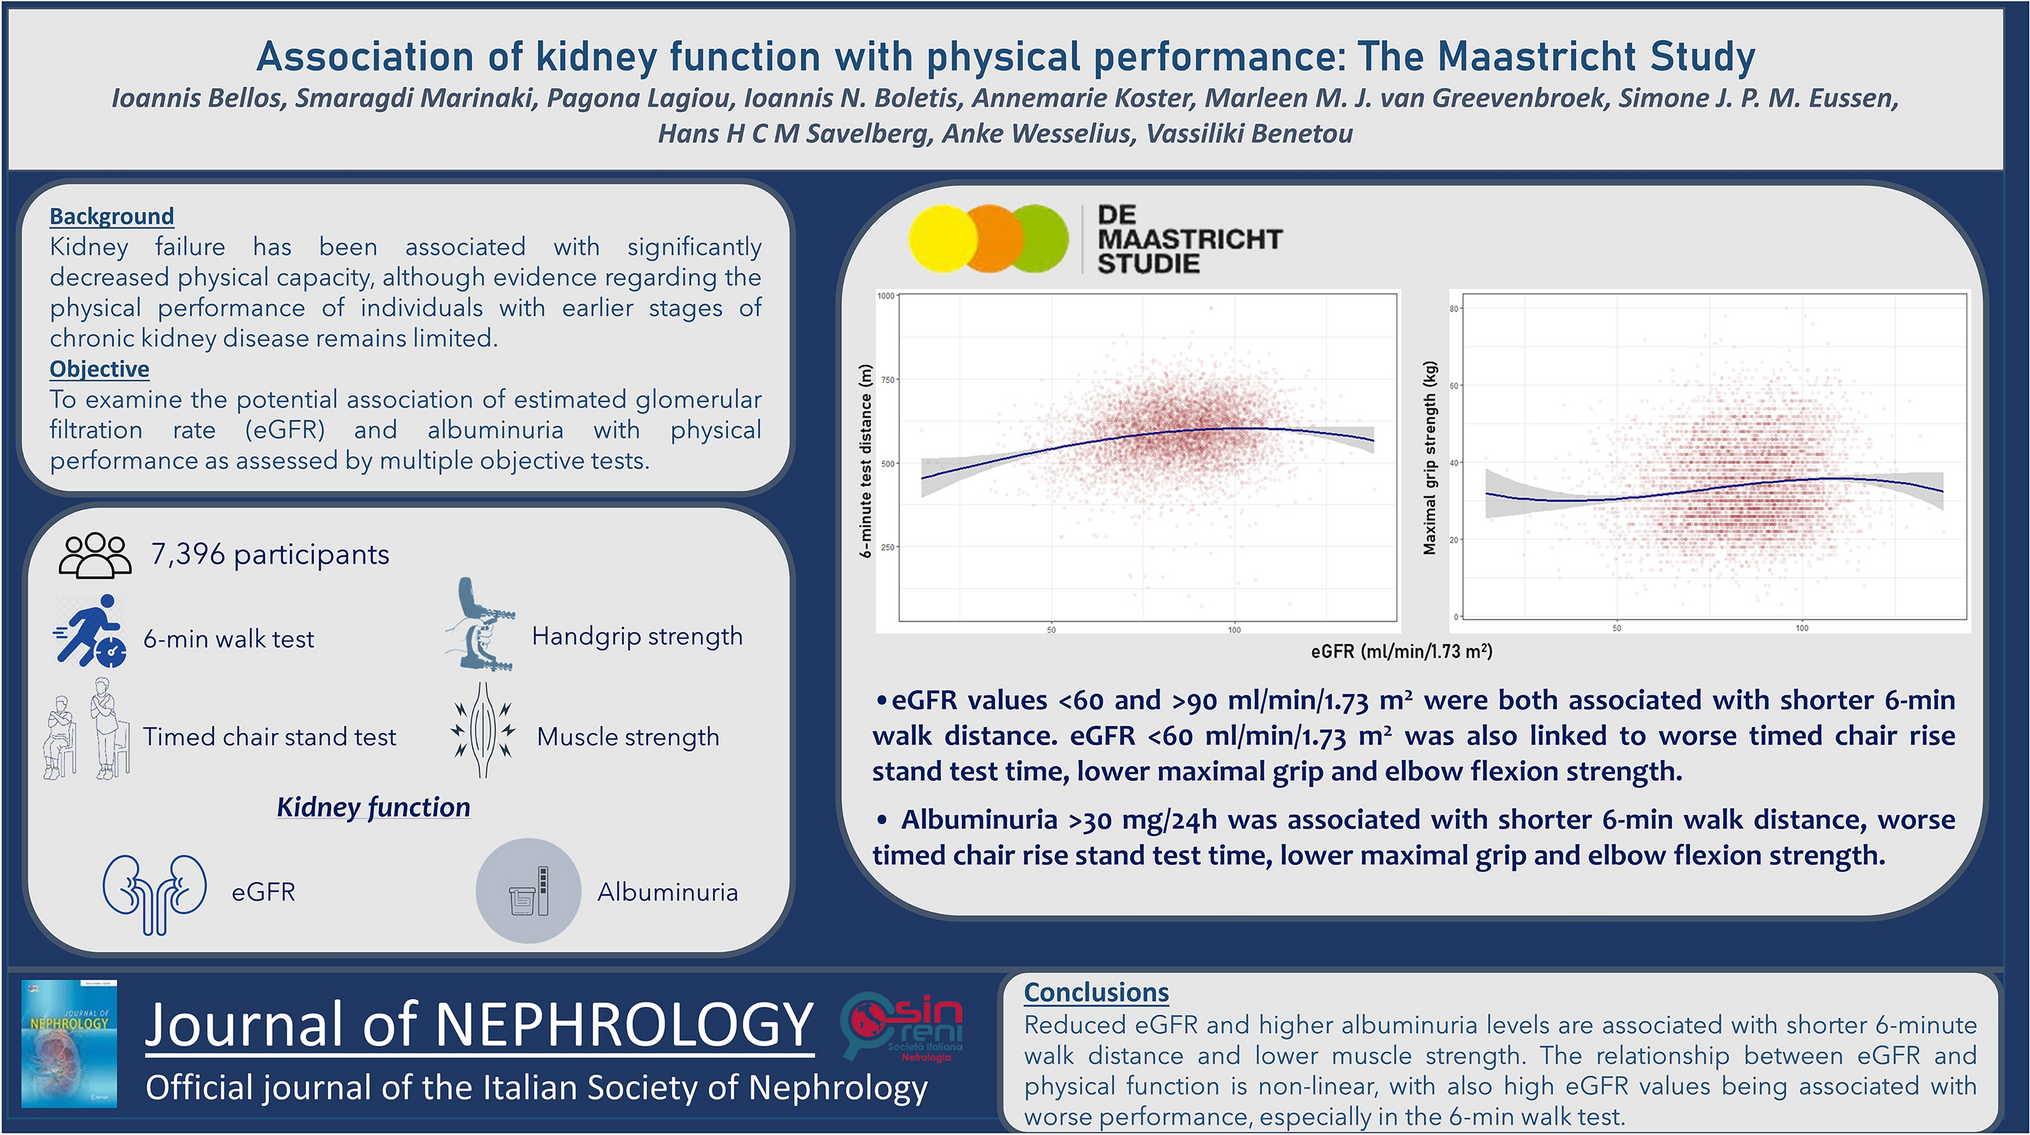 Association of kidney function with physical performance: the Maastricht study